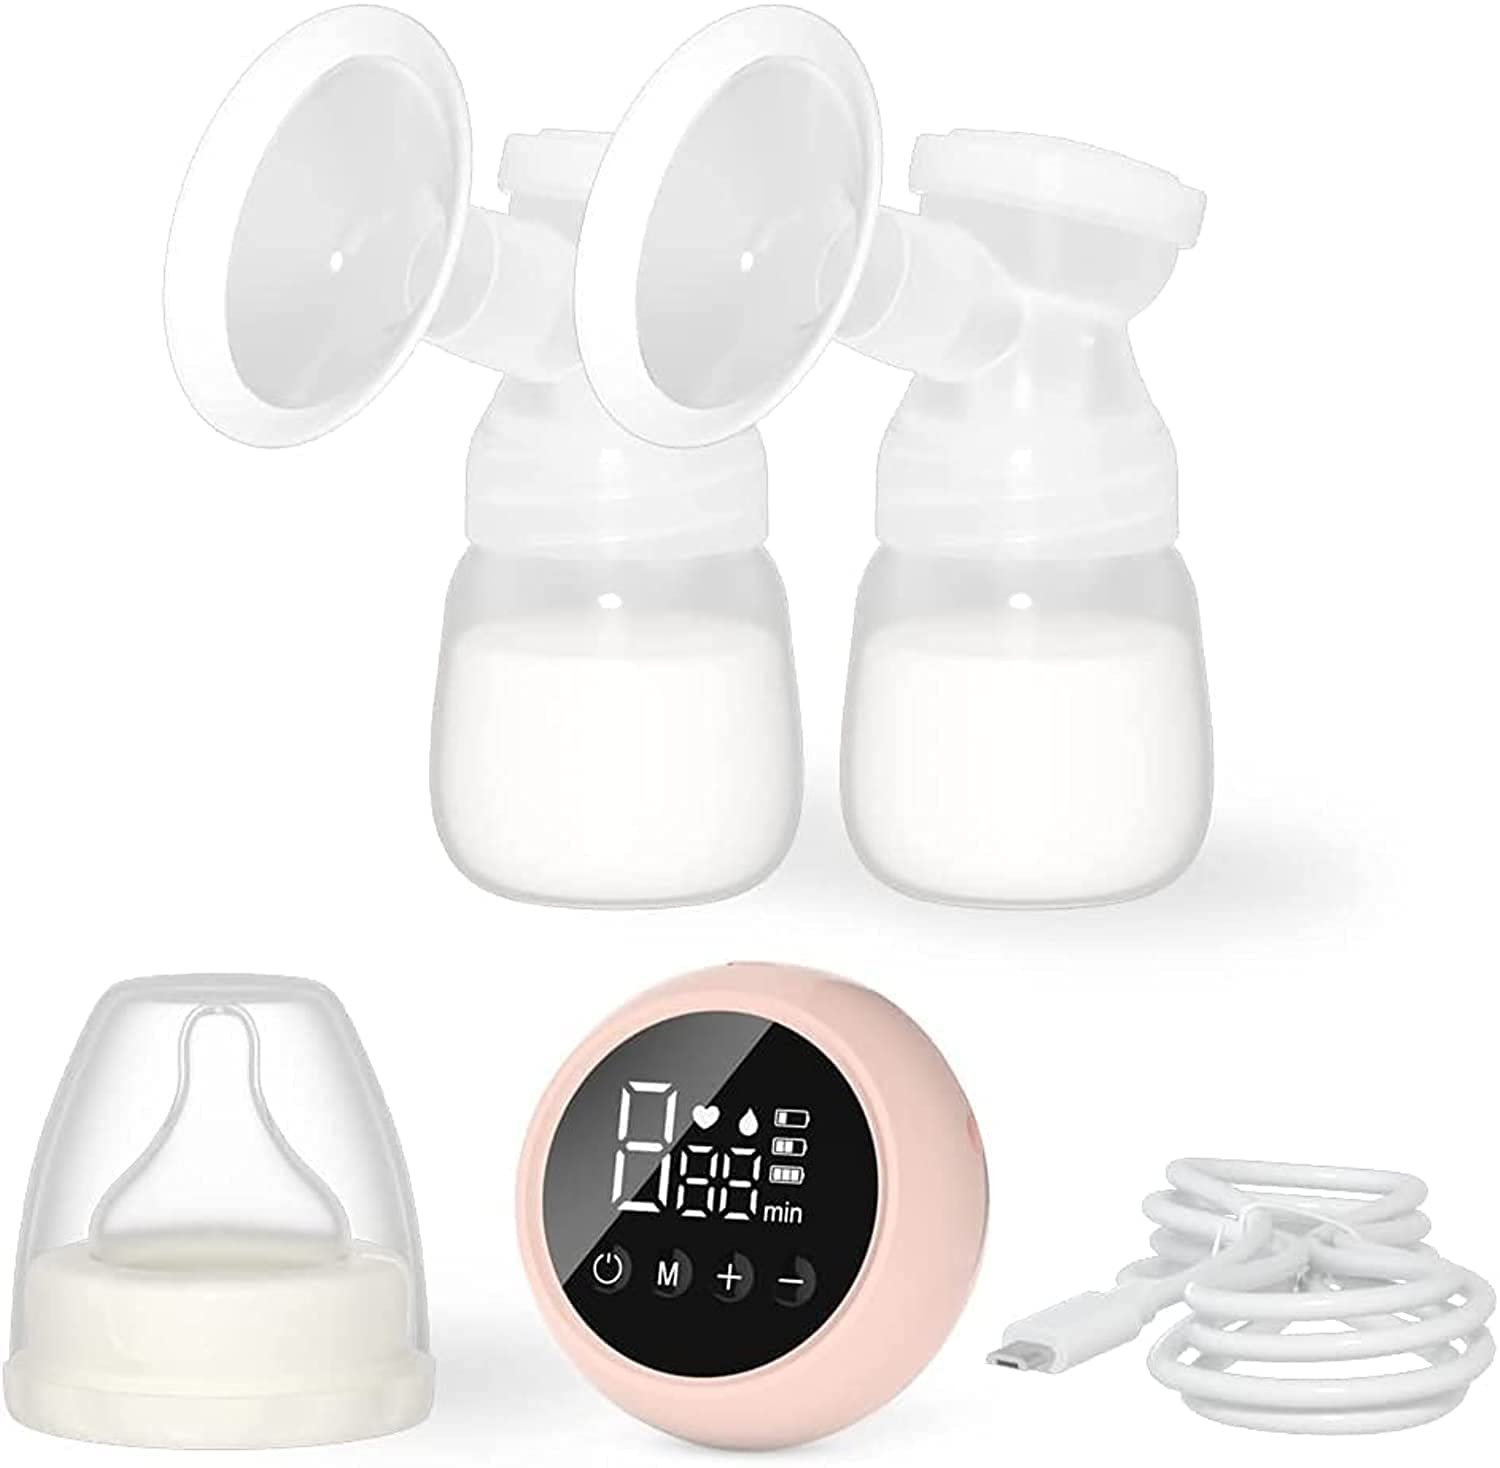 Arabest Dual Electric Breast Pump with Massage, Breast Pump with 2 Modes and 9 Levels, Rechargeable Nursing Breast Pump with LED Display